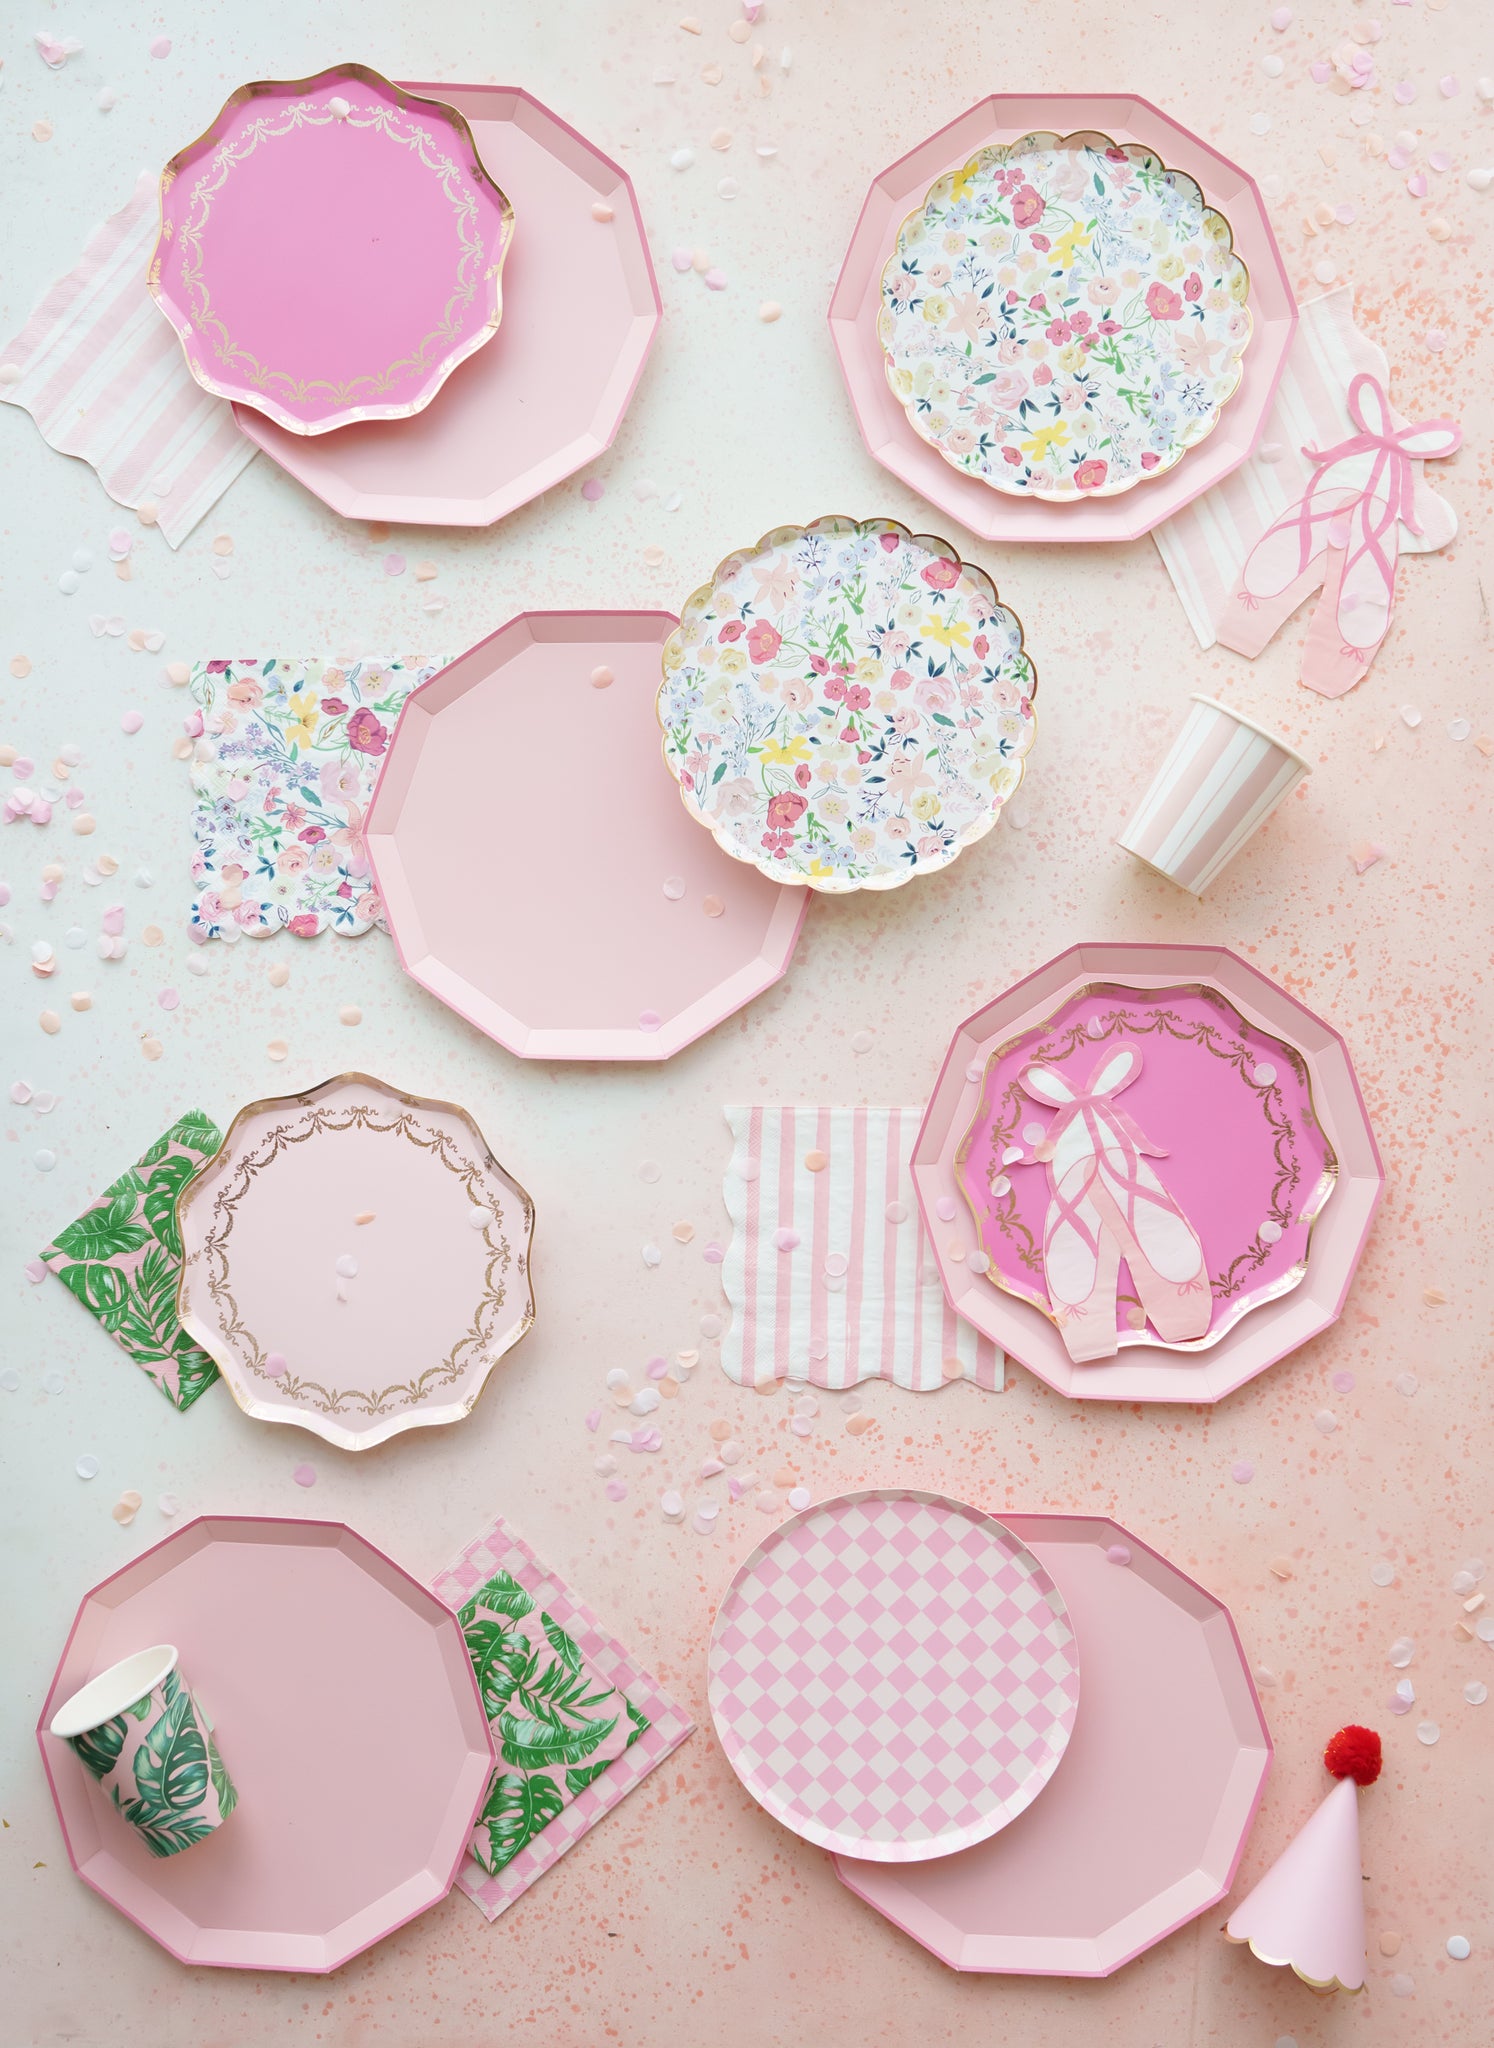 Petal pink premium party plates to use for a princess party, ballerina party, tea party, adult birthday party, girl baby shower, and any occasion!